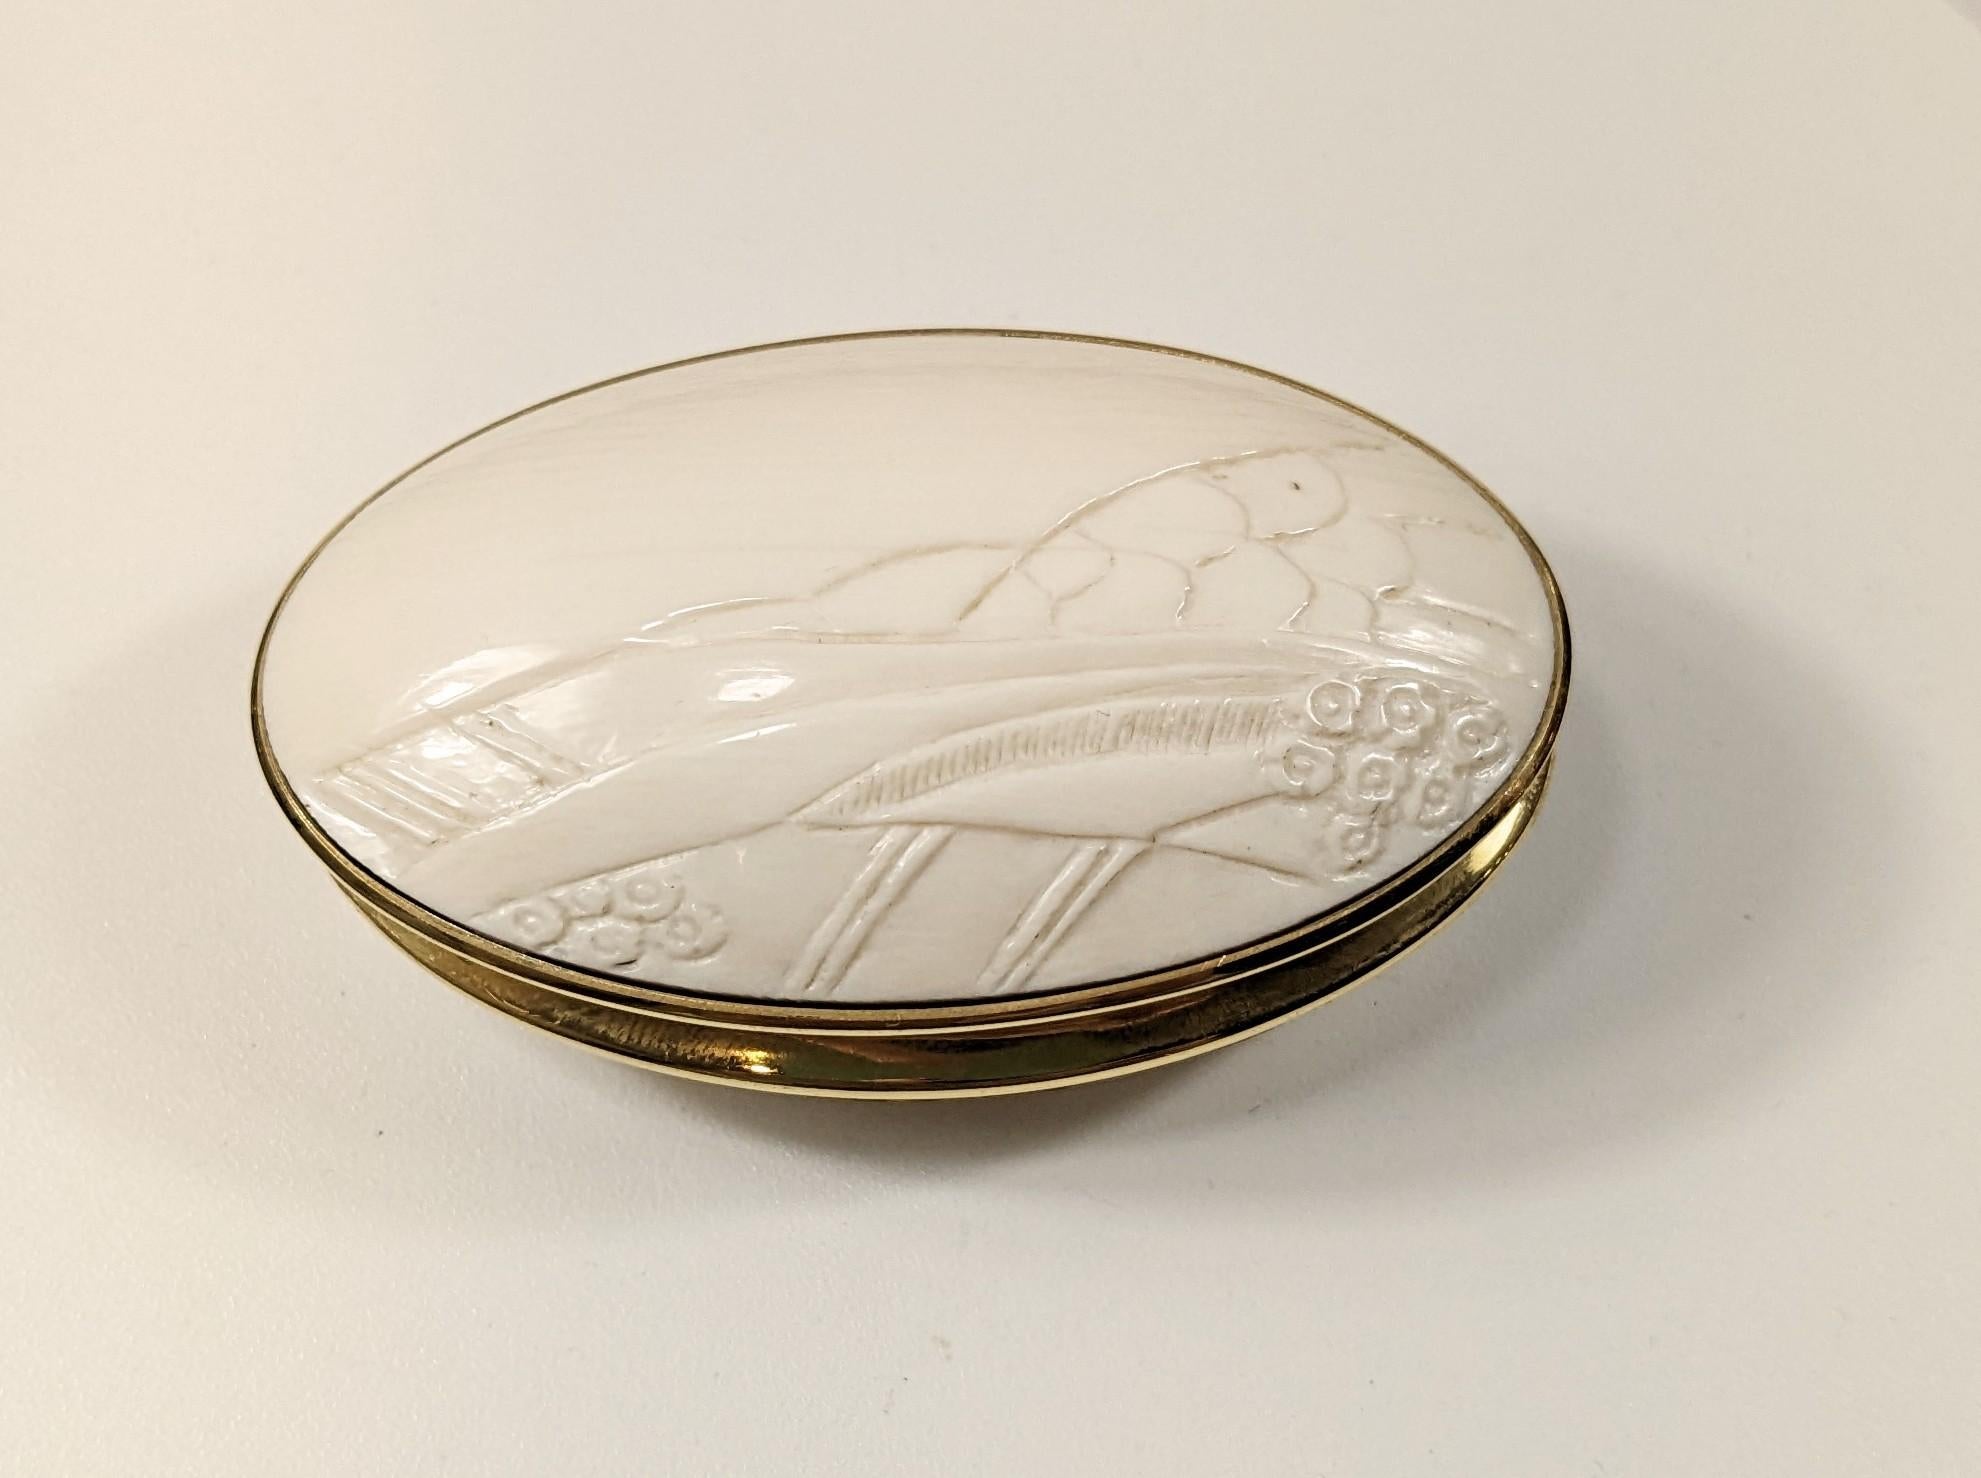 18k gold and ivory pill box with a country landscape motif by the Catalan sculptor Josep Guardiola Bonet
Measures 6 x 4 x 2,2 cm.
Inches  2,36 x 1,57 x 0,86 inches 
Total weight 38 grams   
Gold weight 12 grams
Ivory weight  26grams


Guardiola